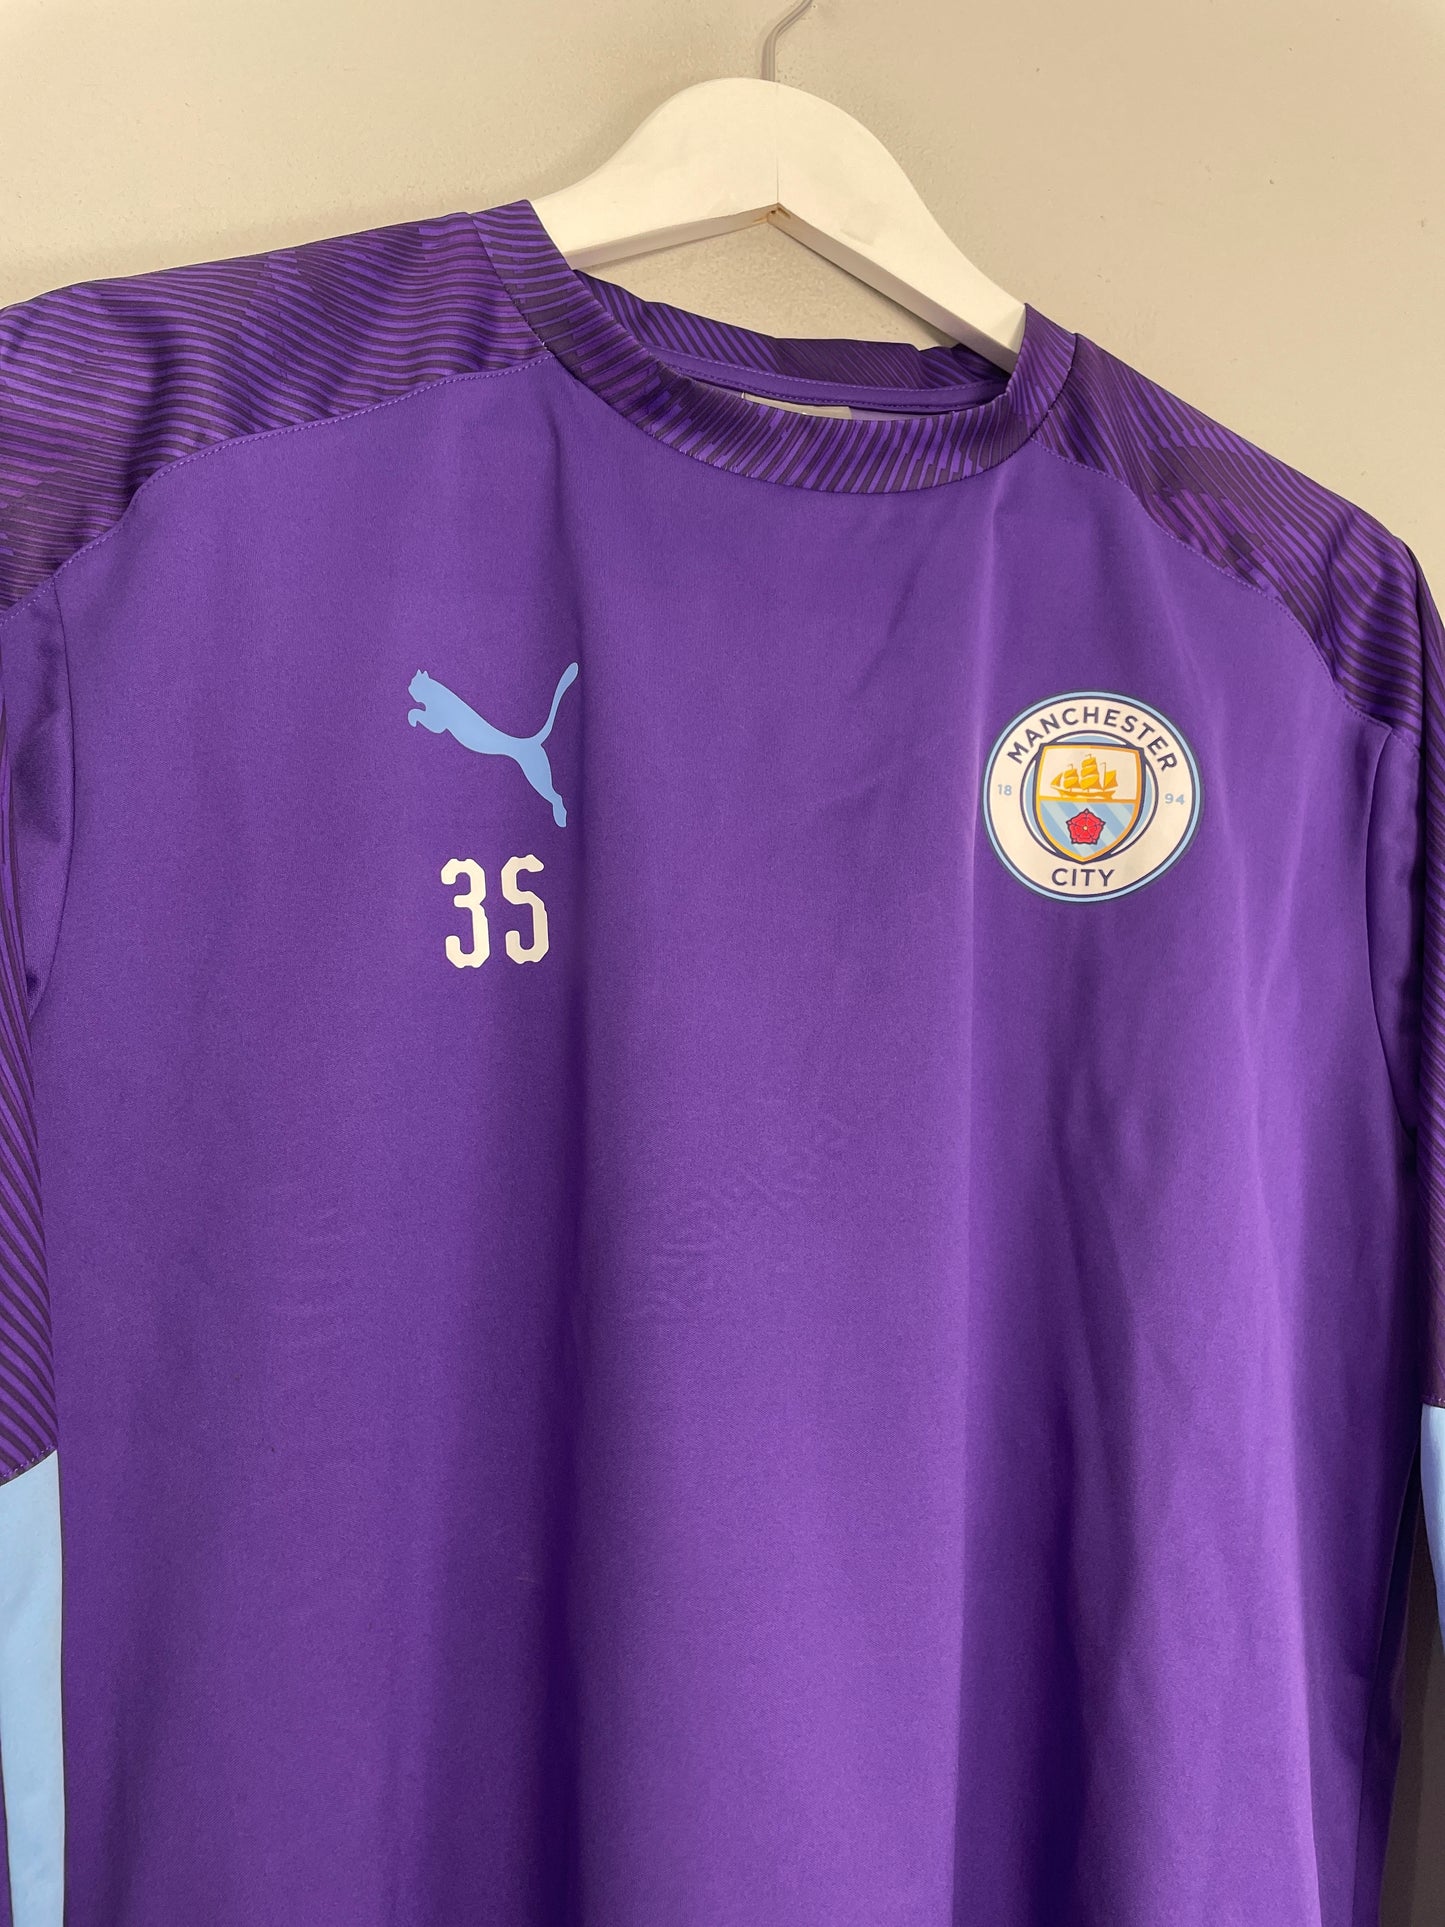 2019/20 MANCHESTER CITY #35 *PLAYER ISSUE* DRILL TOP (M) PUMA